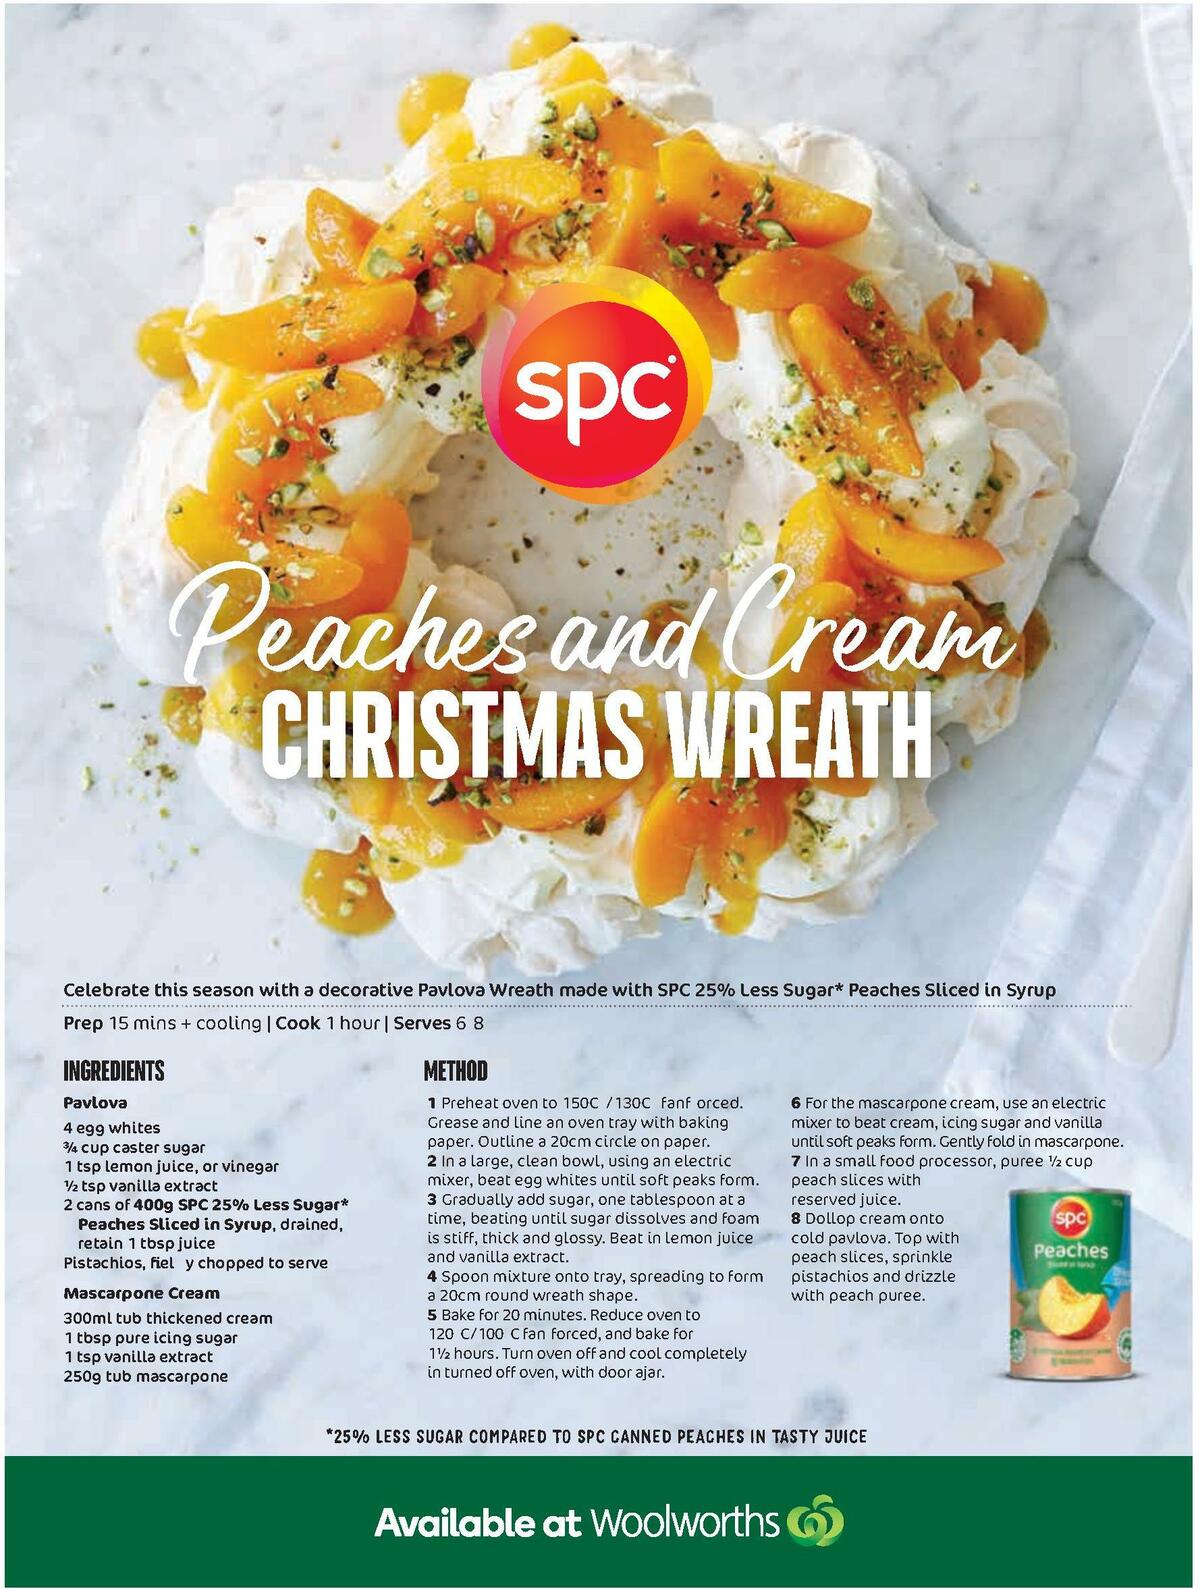 Woolworths Fresh Ideas Magazine December Catalogues from 1 December